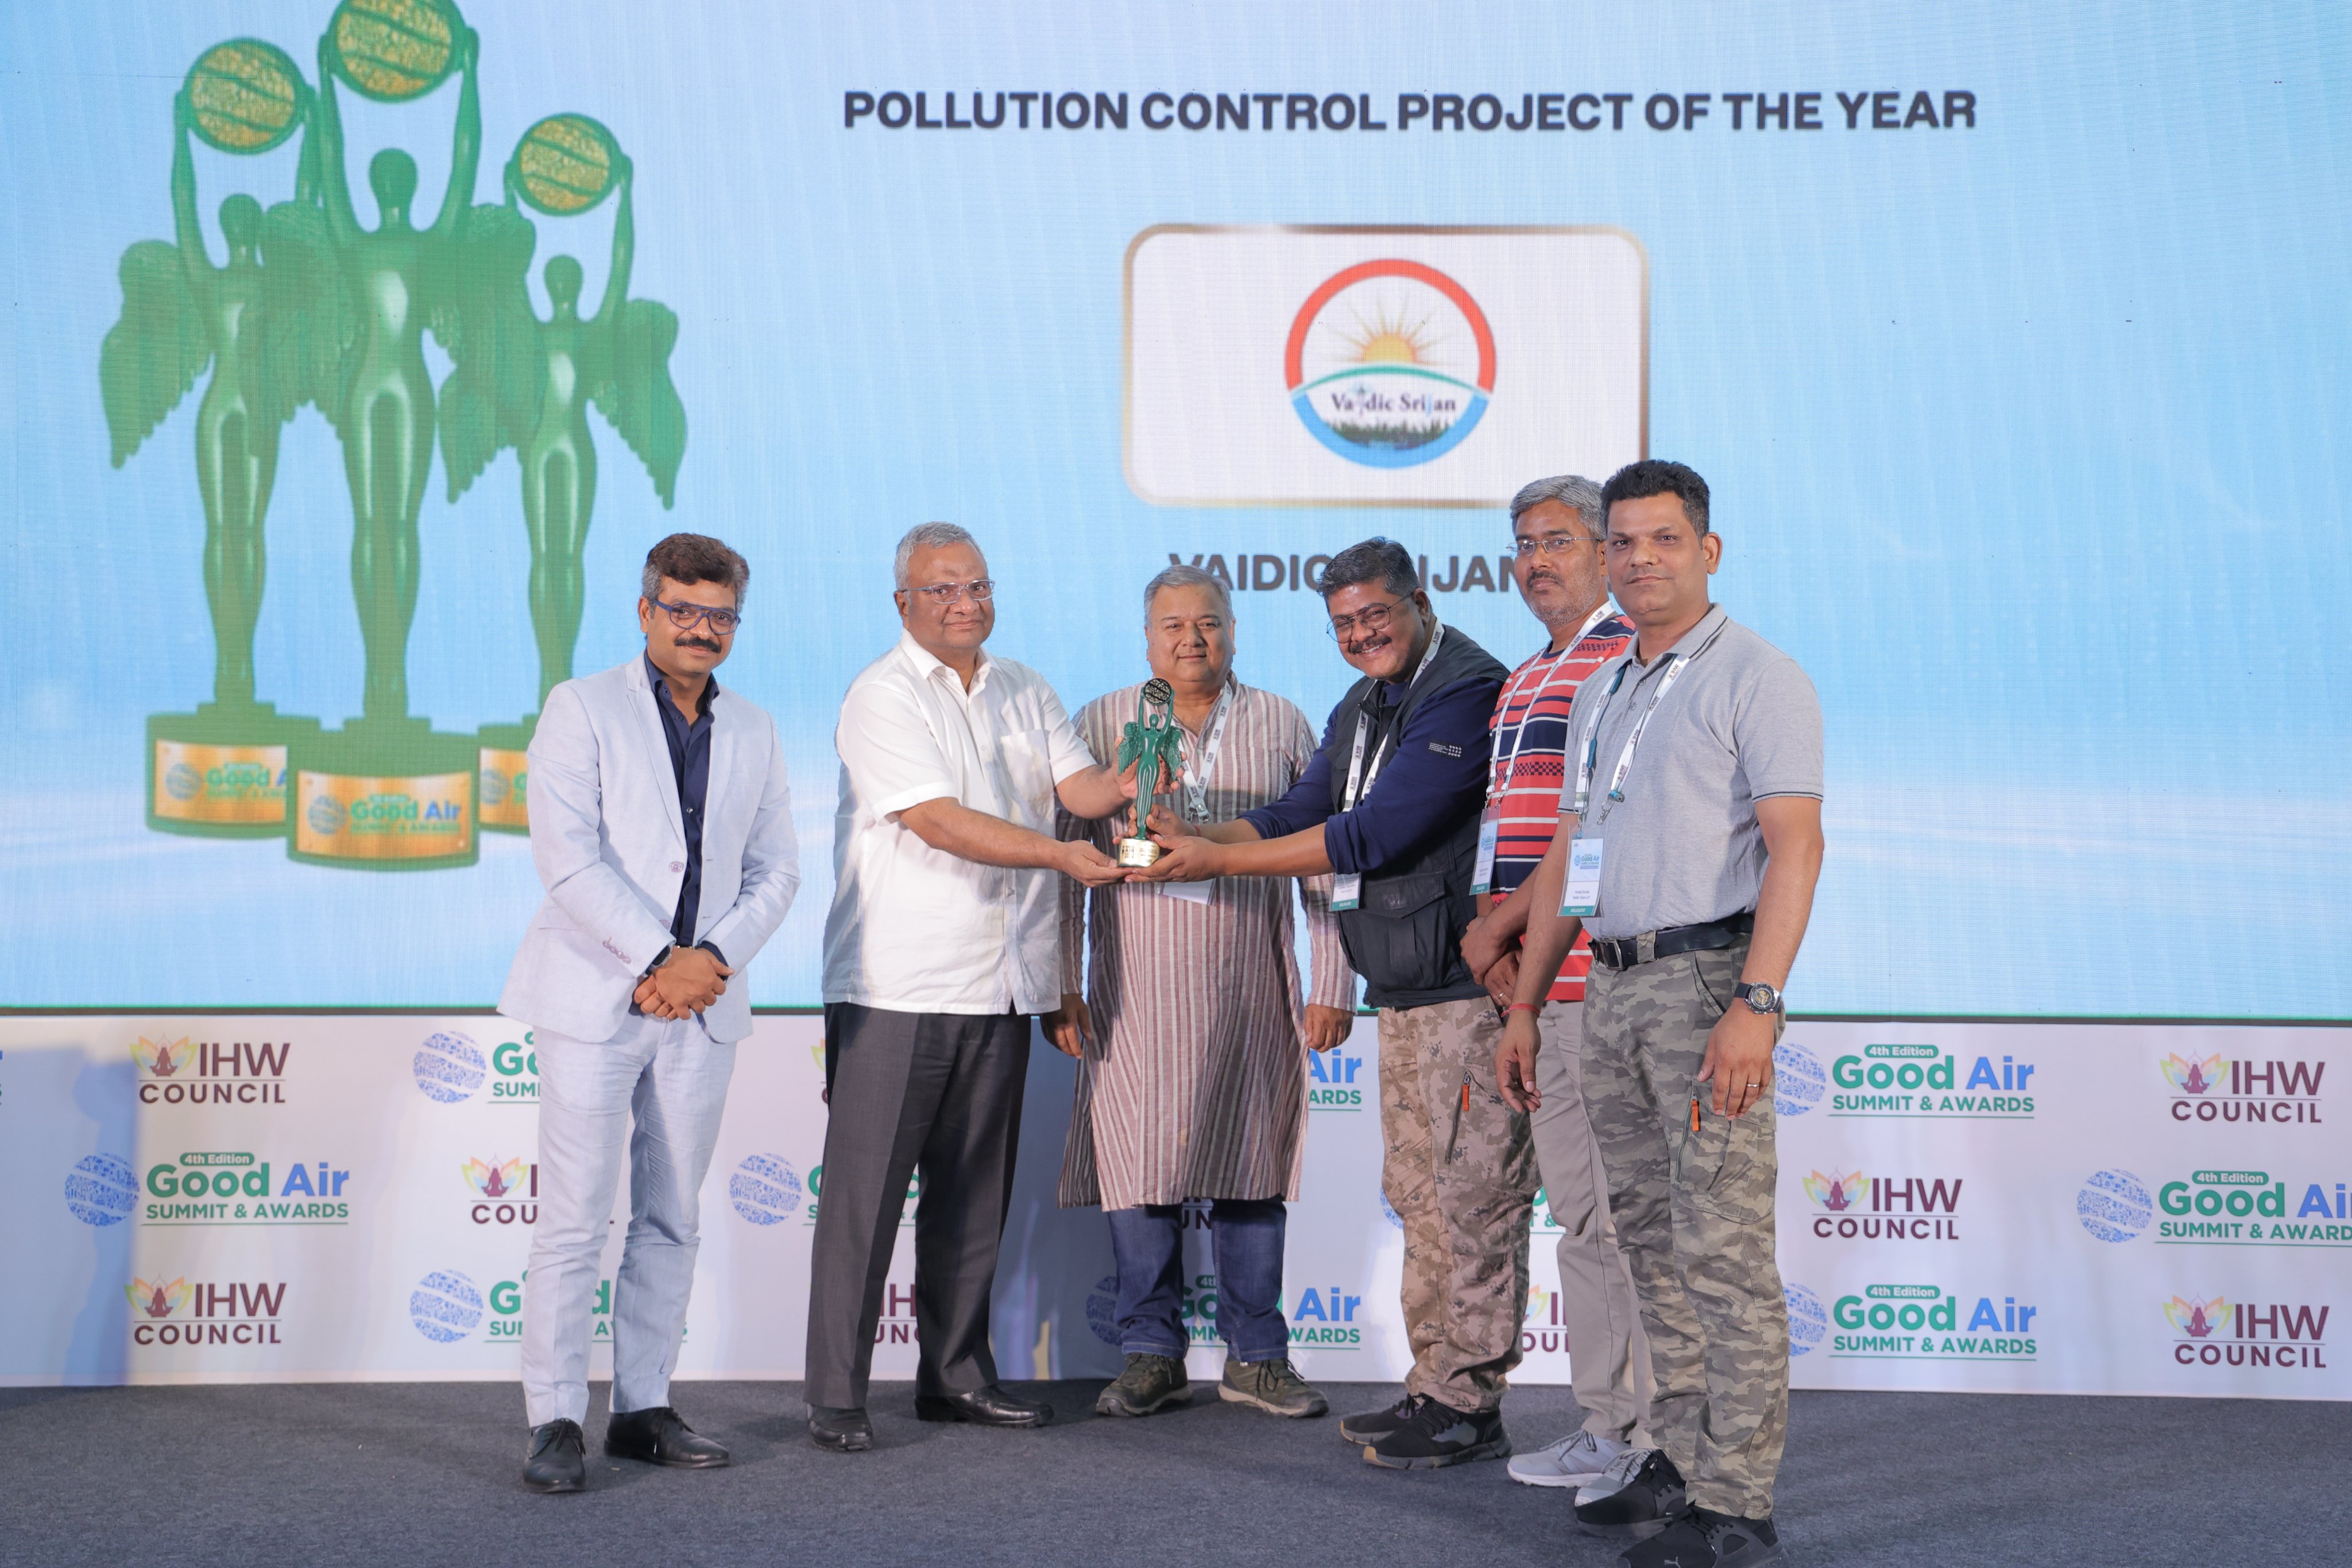 We&rsquo;re proud to share that we&rsquo;ve been honored by IHW Council with the Good Air Award for the Best Pollution Control Project of the Year 2024,...